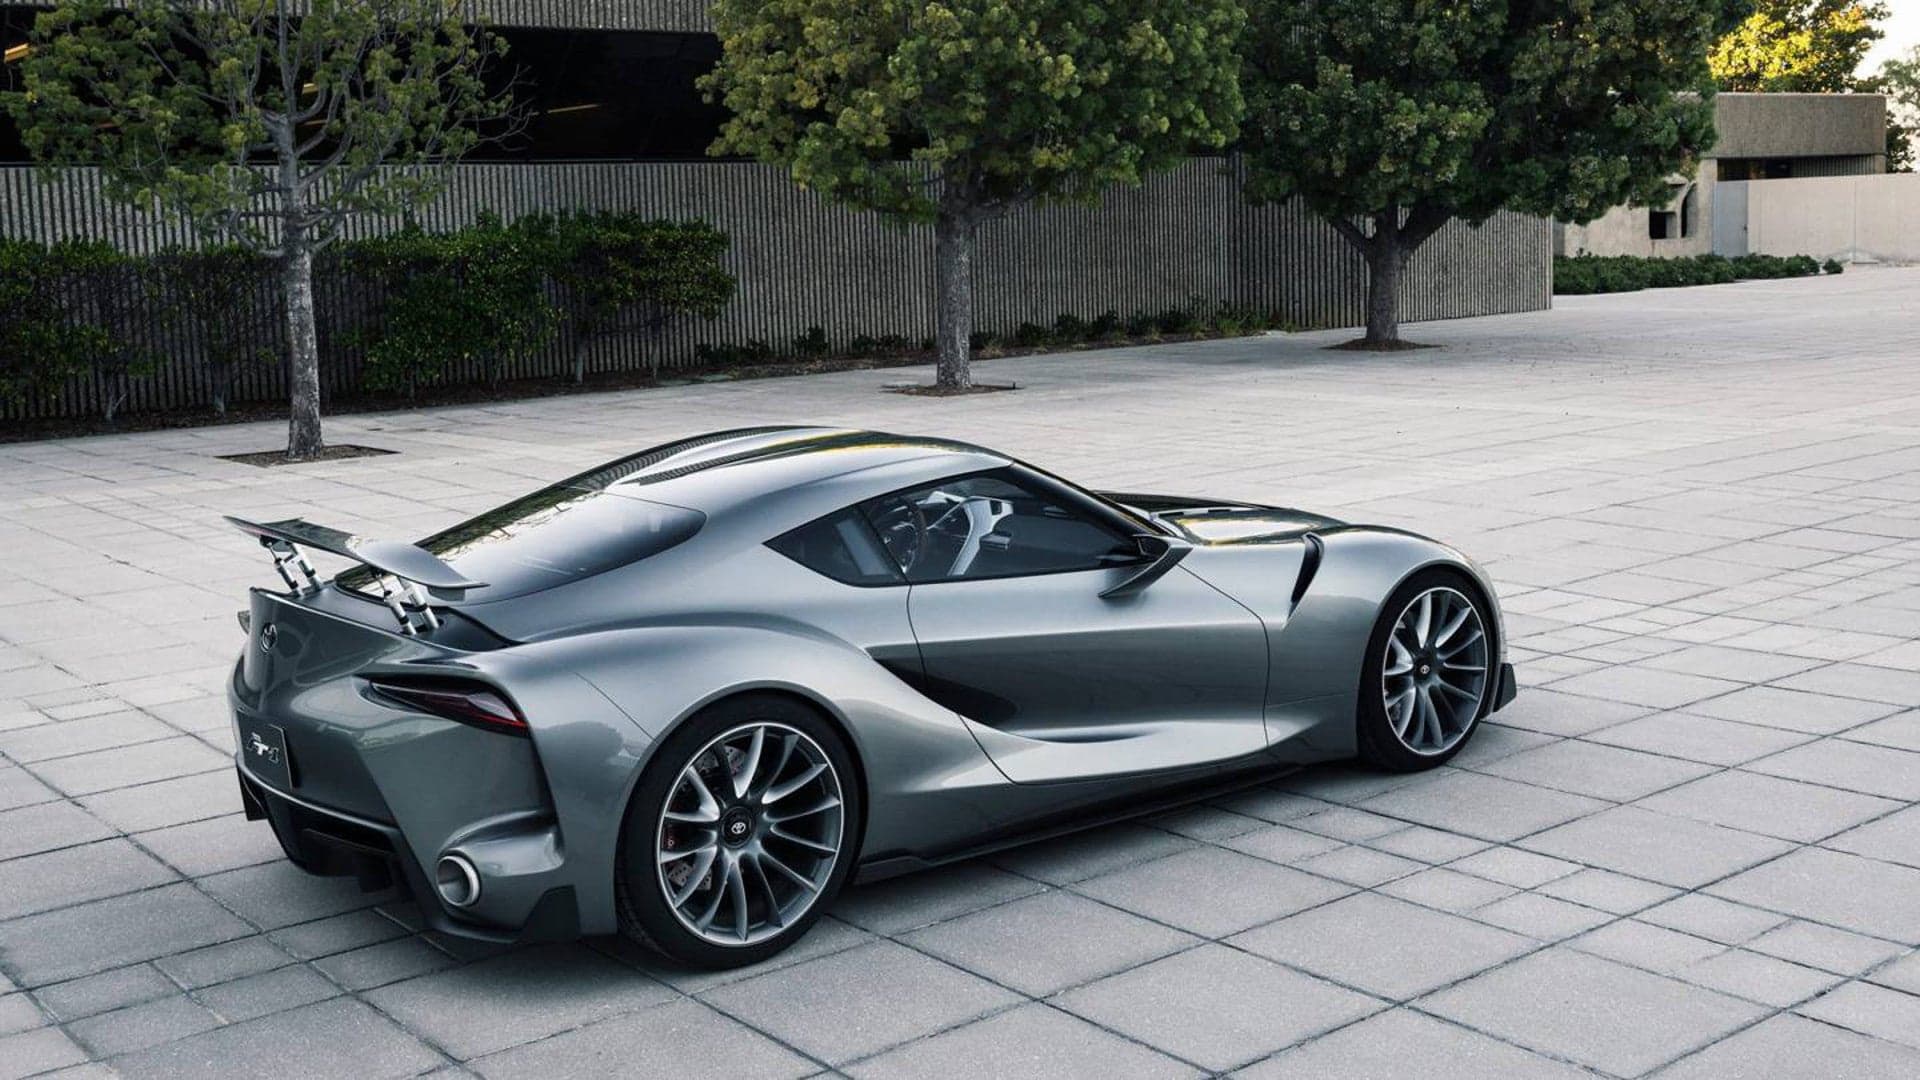 Internal BMW Document Seems to Confirm Automatic-Only Toyota Supra